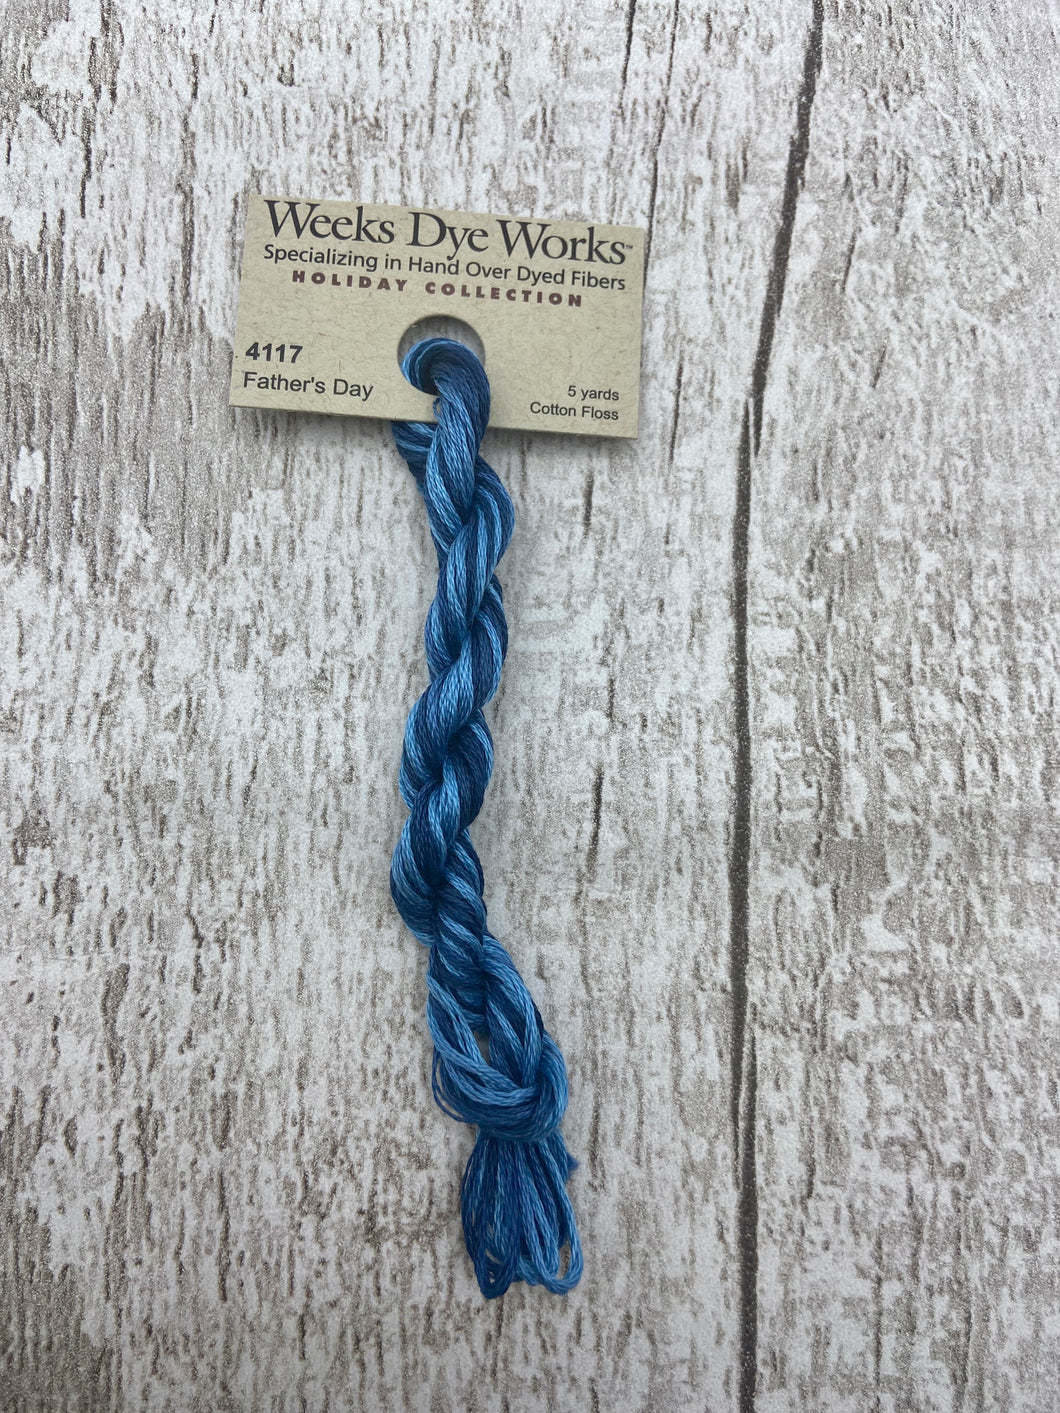 Father's Day (#4117) Weeks Dye Works 6-strand cotton floss